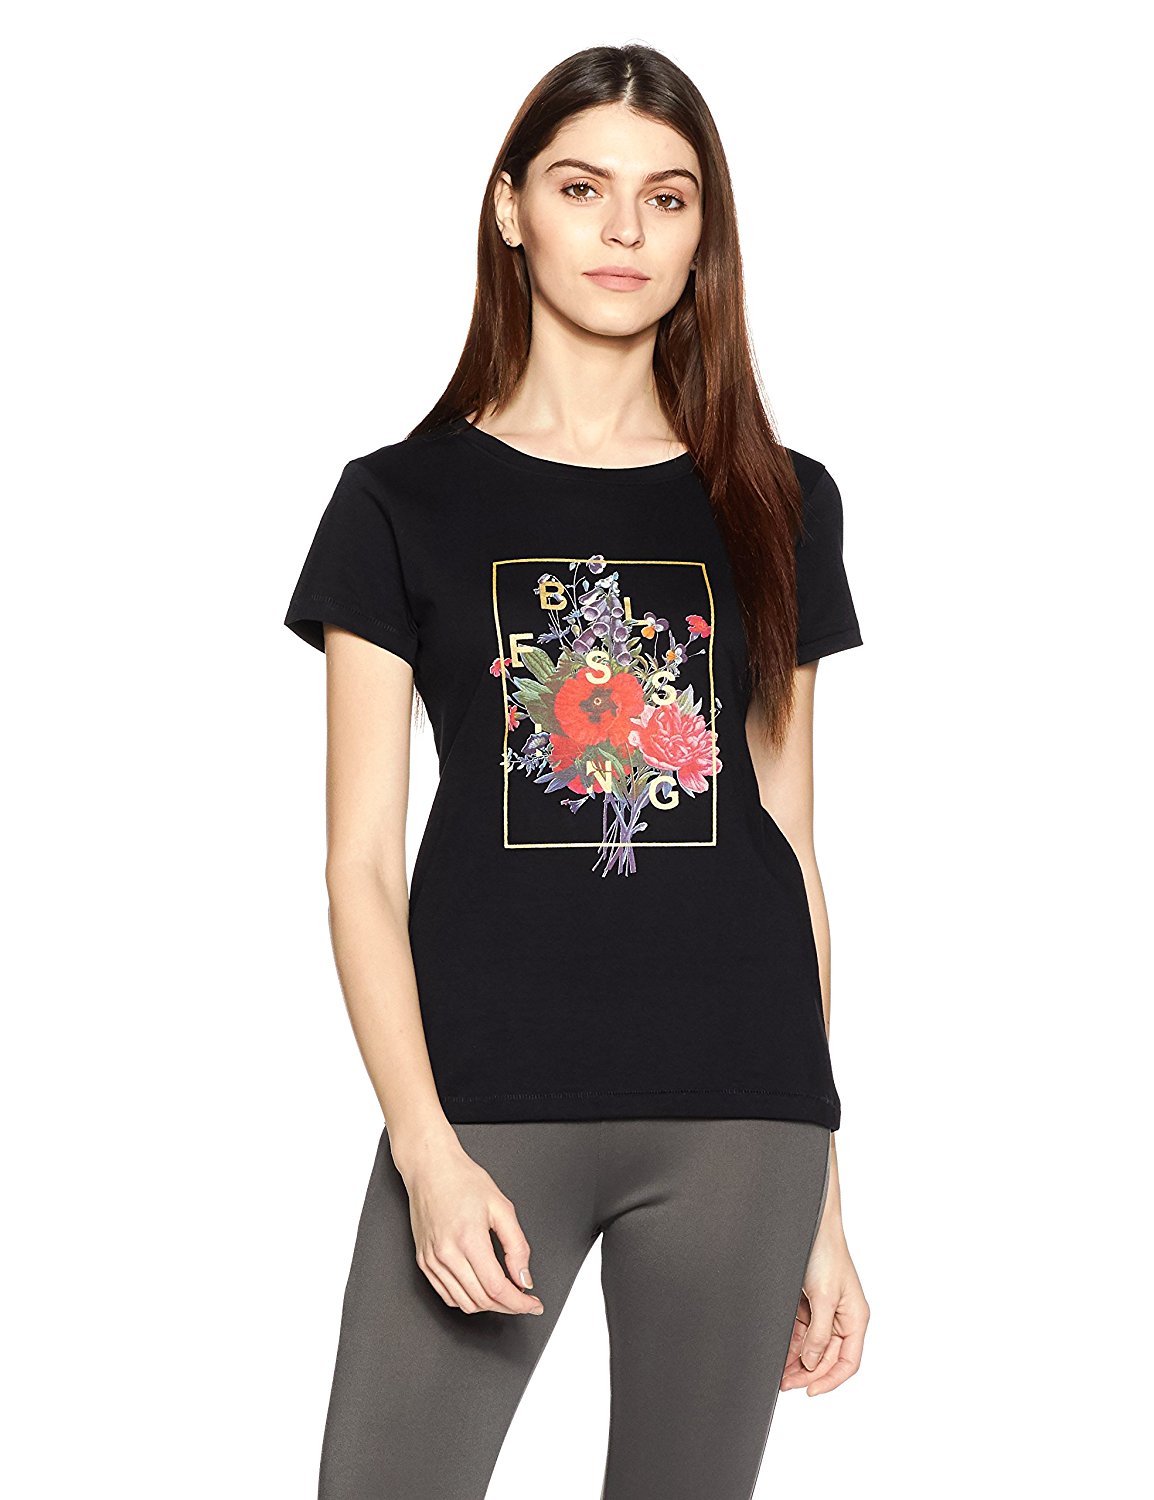 Amazon - Buy Symbol Women's Graphic Print Round Neck Cotton T-shirt in just Rs.149